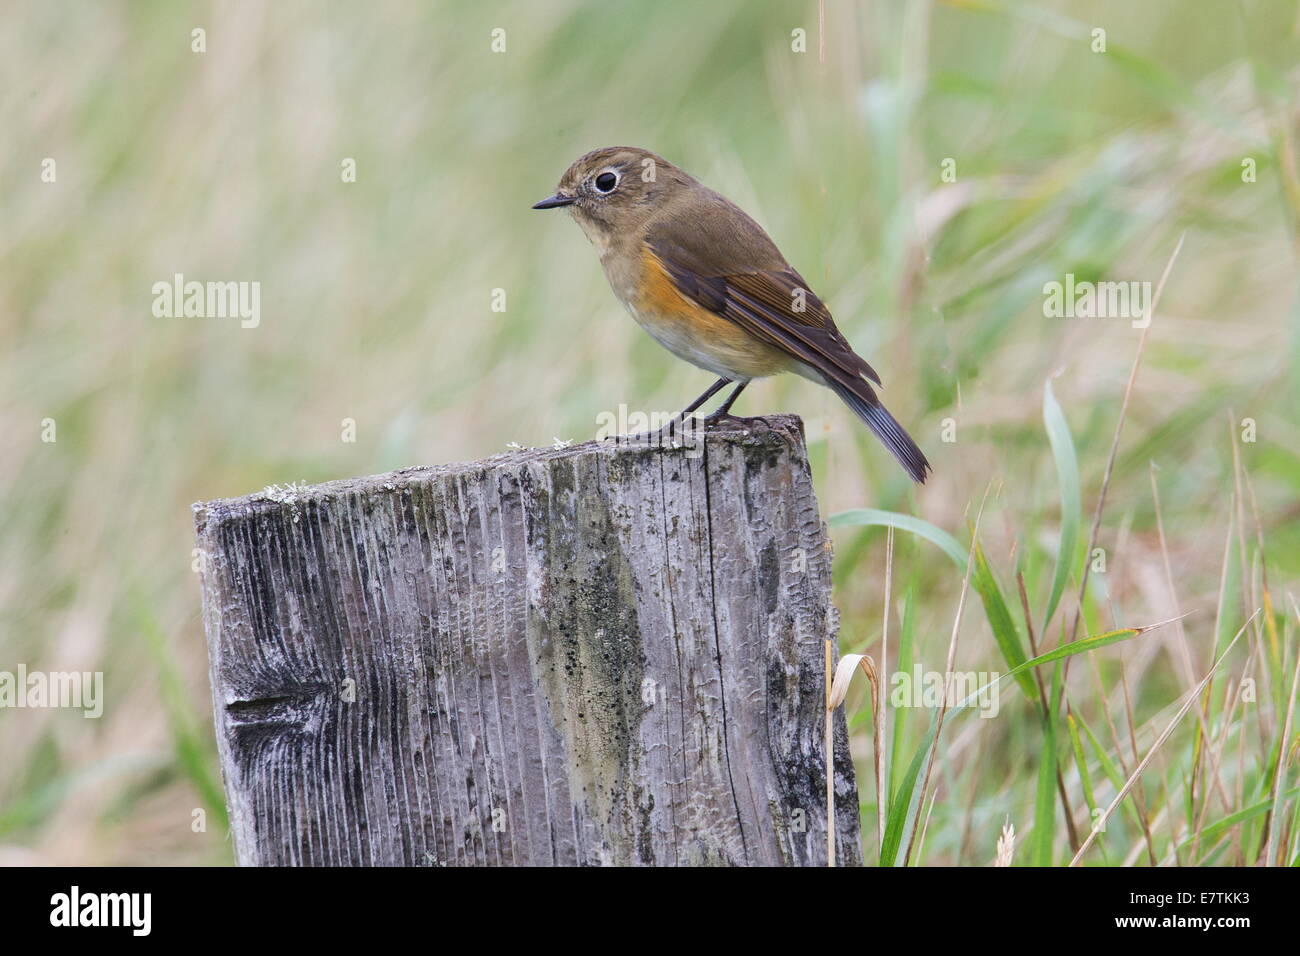 Red-flanked bluetail: A Jewel among Winter Thrushes